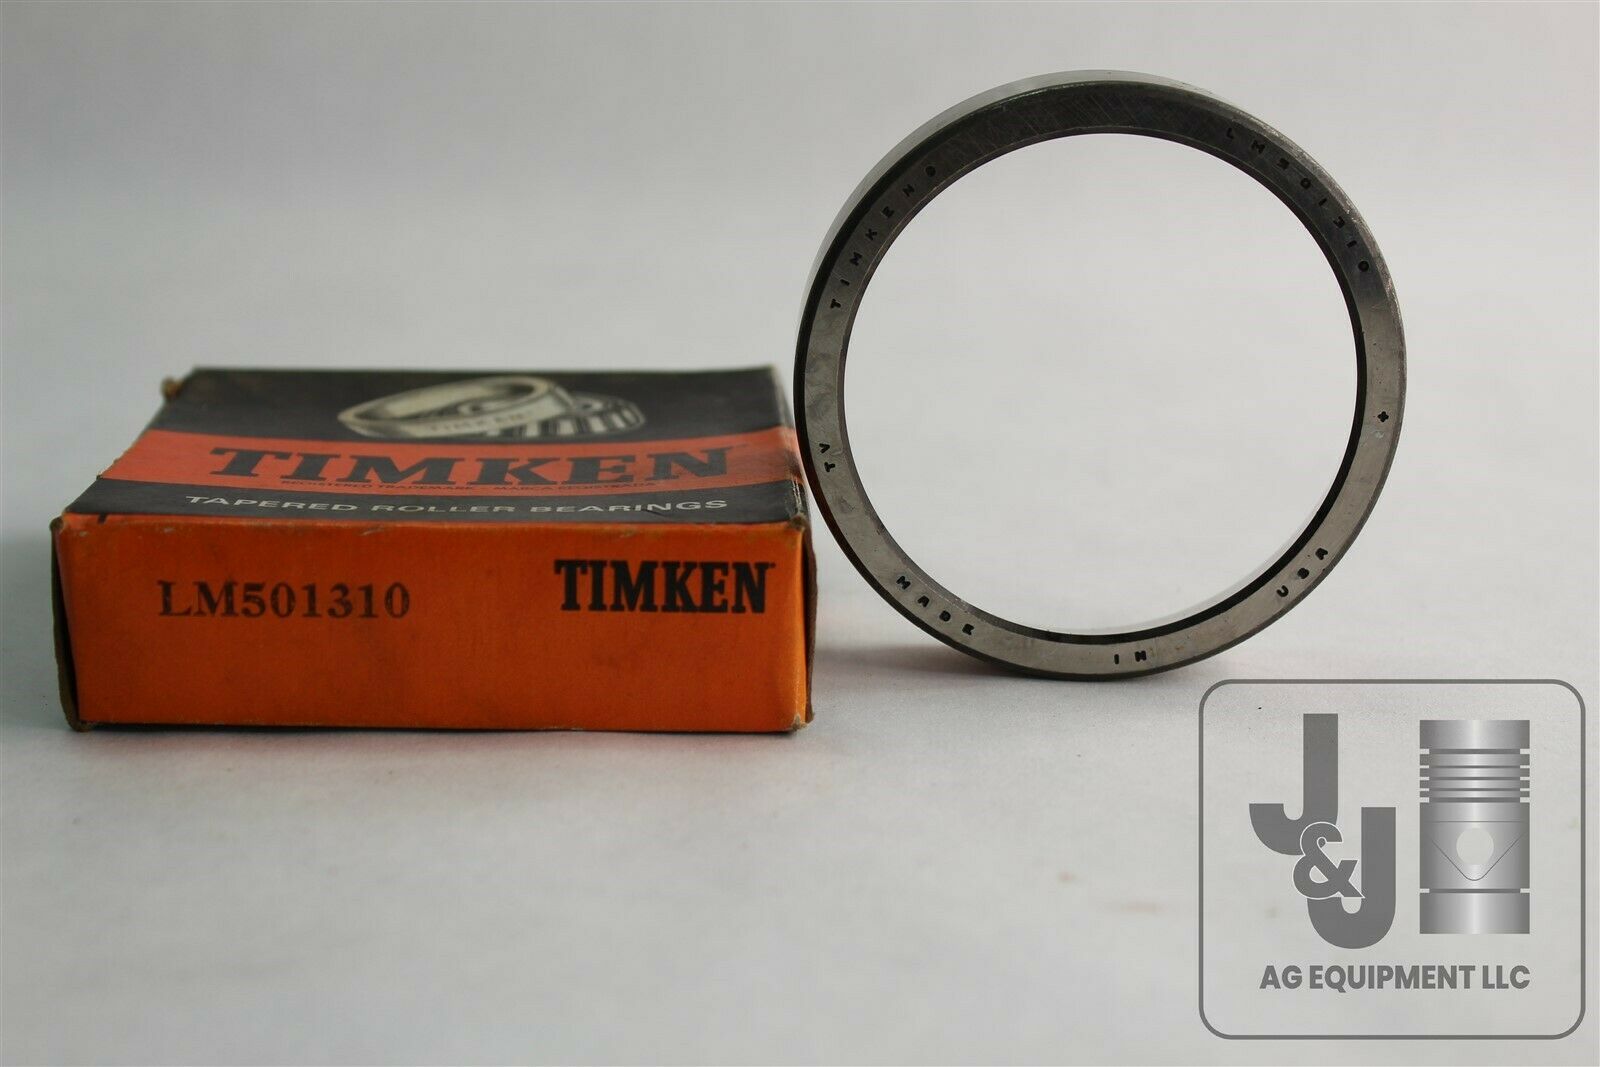 TIMKEN LM501310 Bearing Cup FITS JOHN DEERE JD8237 1165,1175 and 1175